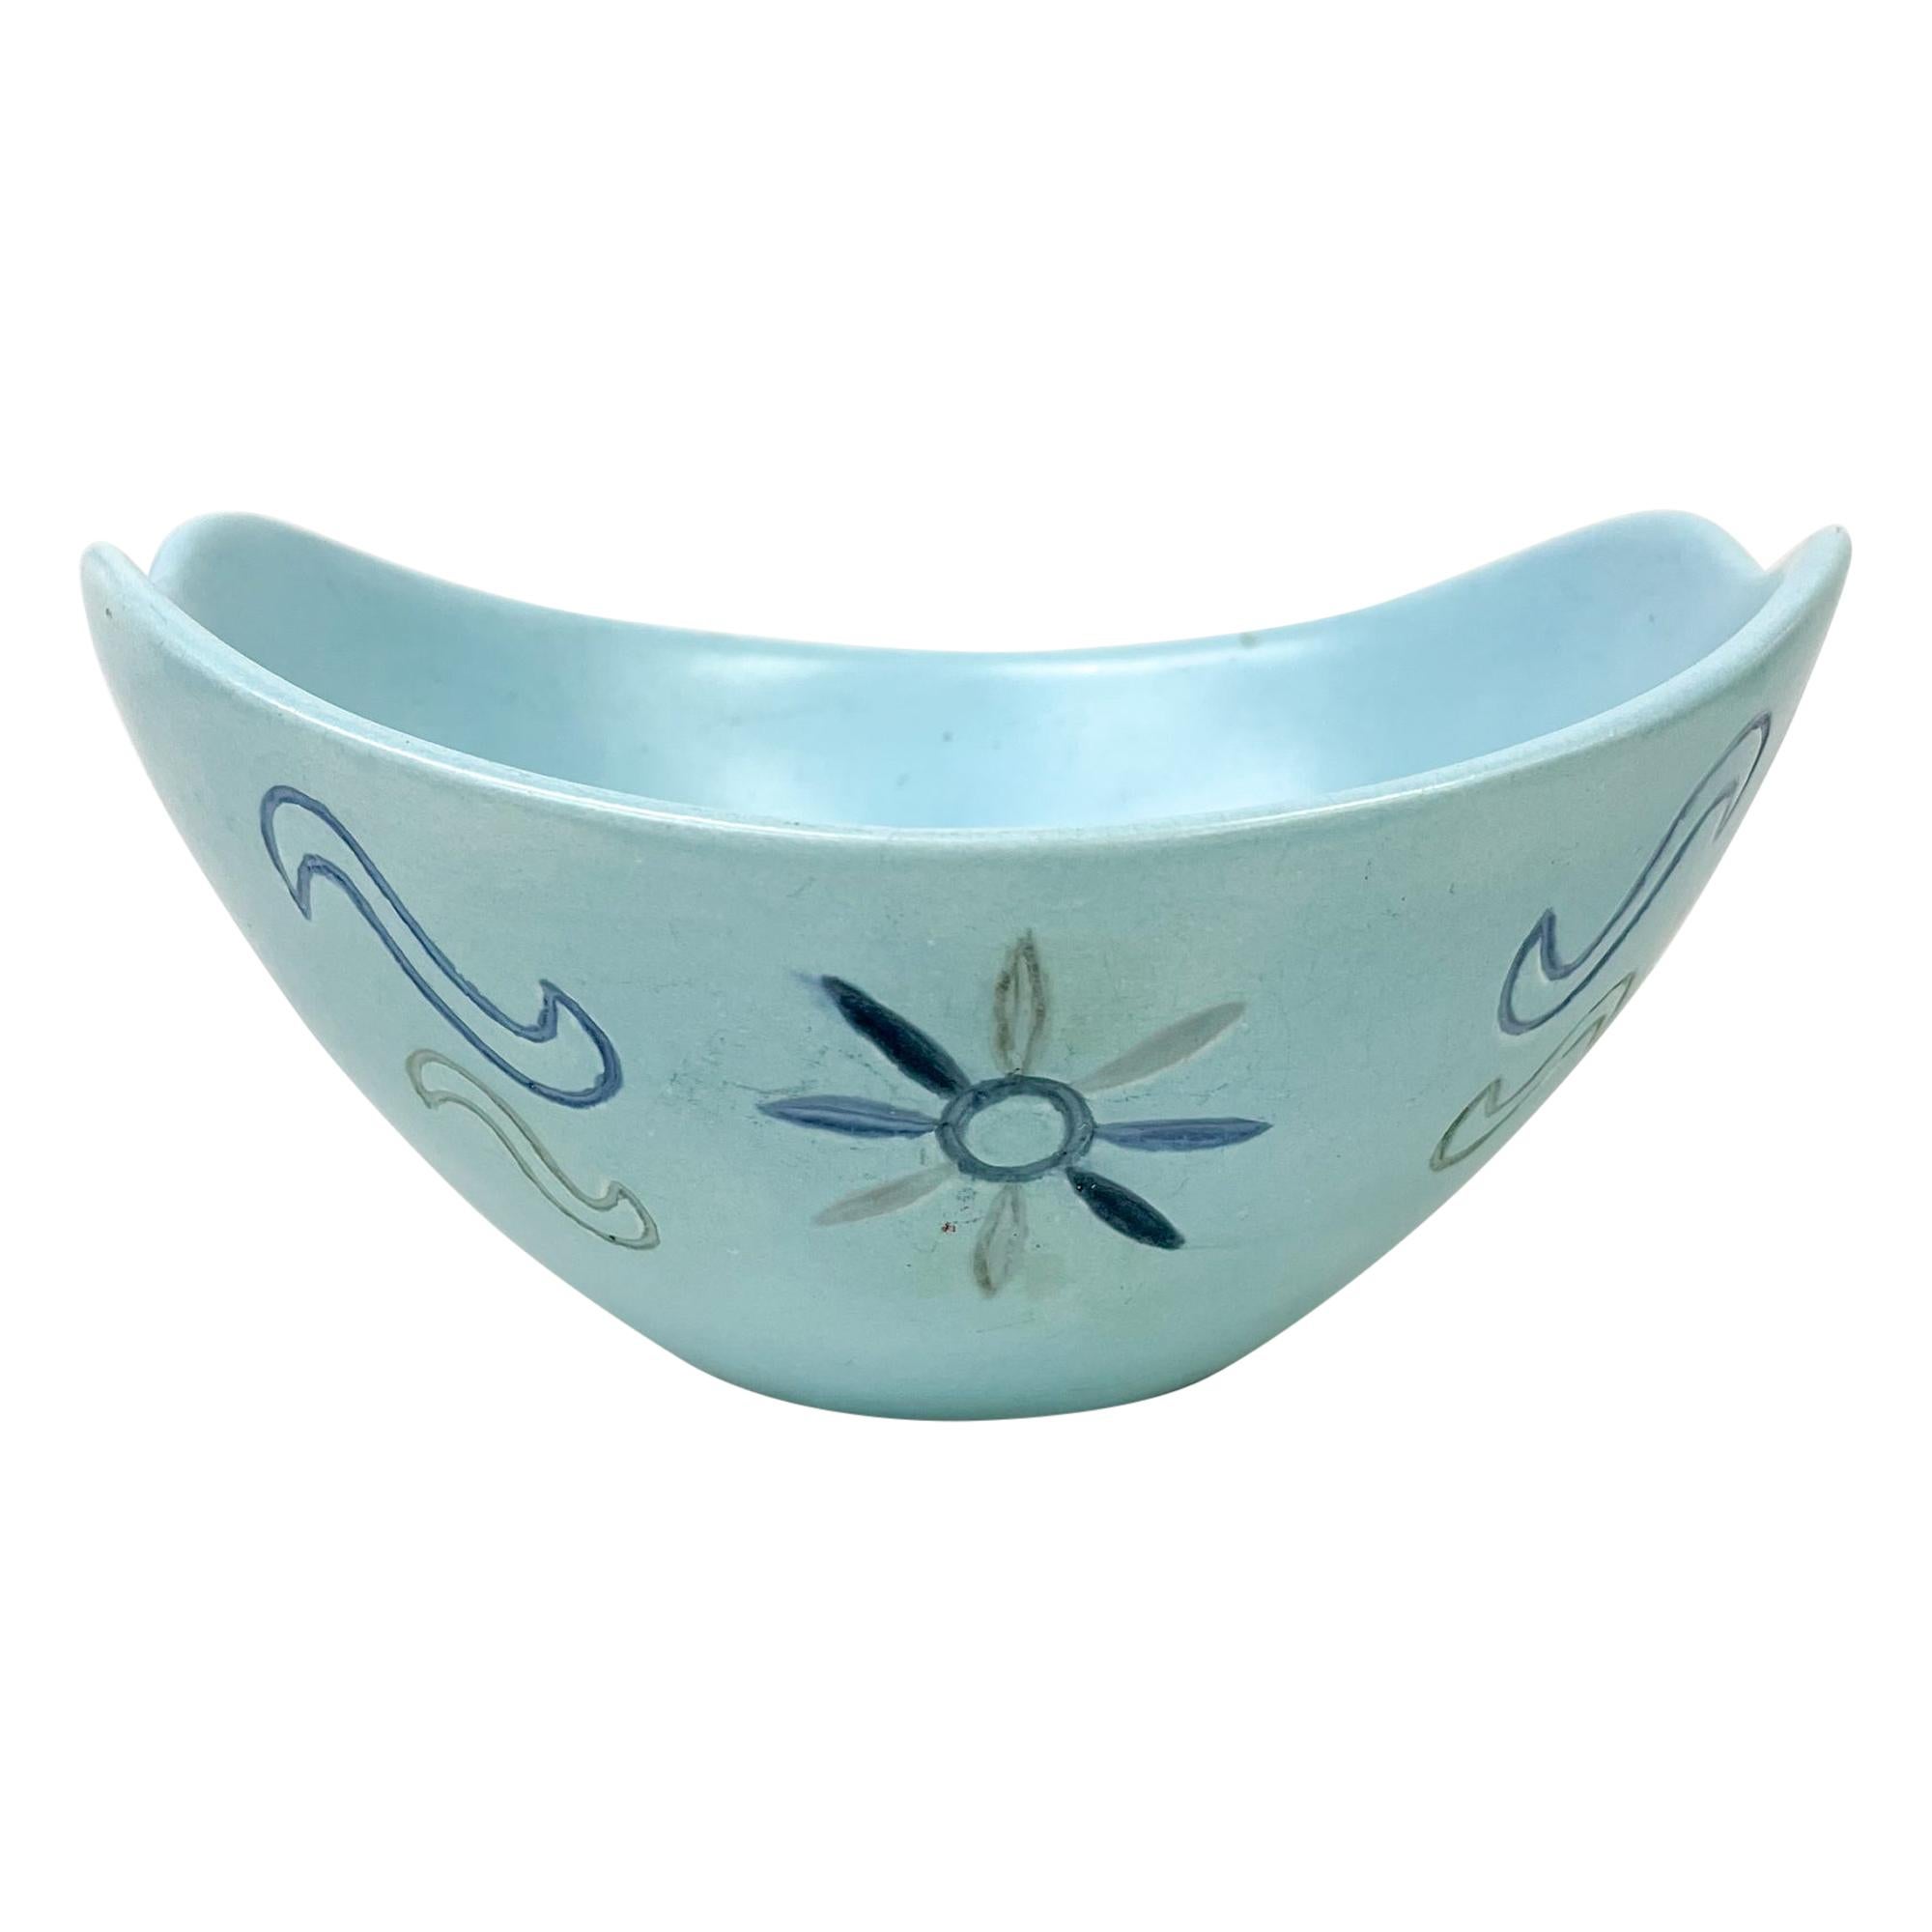 AMBIANIC presents
Vintage pottery bowl with sculptural shape in baby blue.
Hand decorated with different shades of blue.
Signed underneath Bea Grant 1965. Made in the USA.
Good vintage unrestored condition.
3.5 H 7 W x 6.5D.
Refer to images.